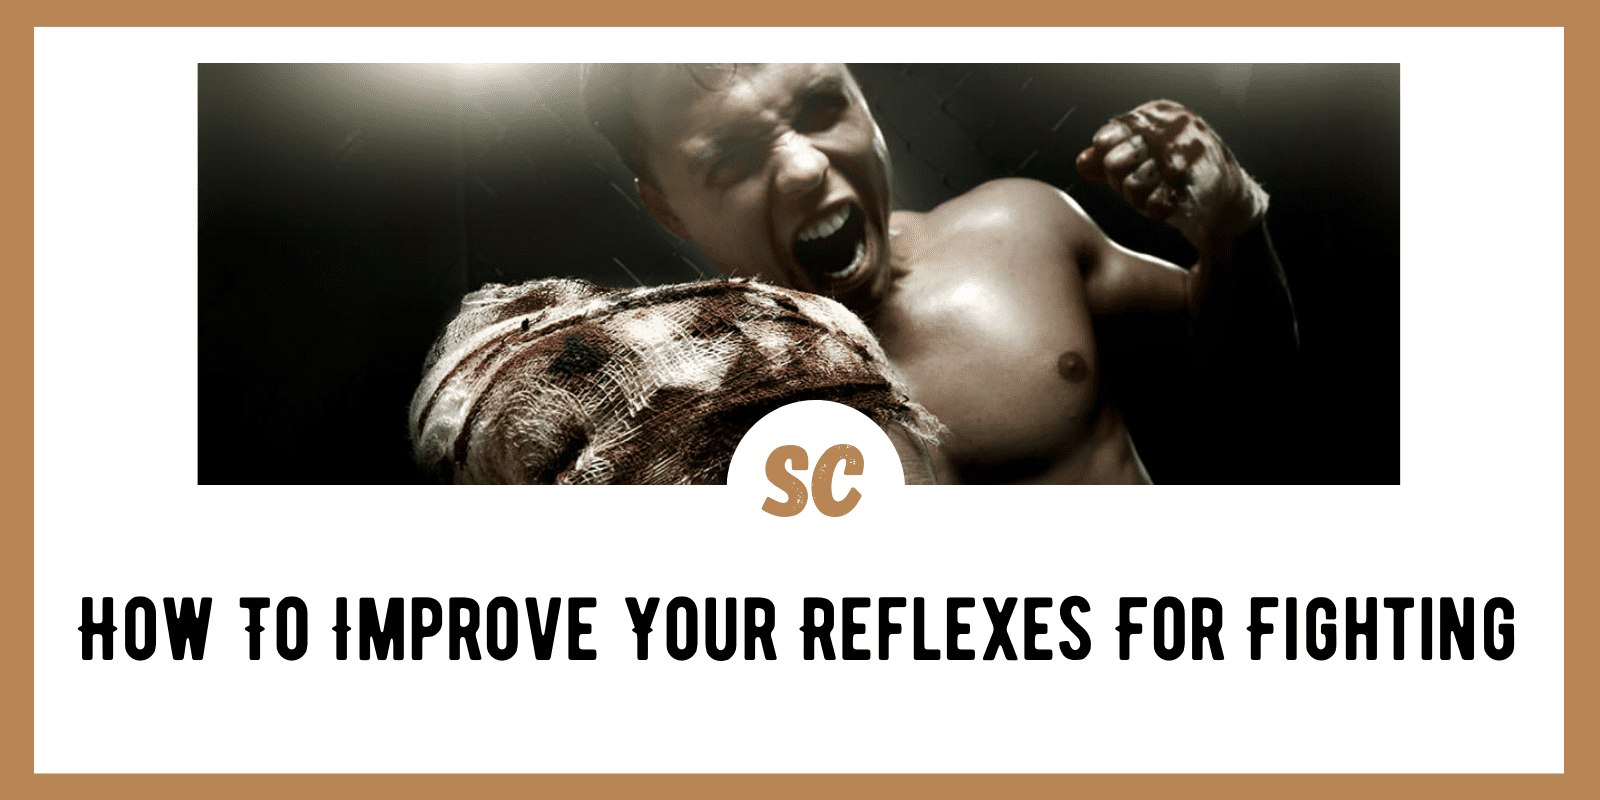 How To Improve Your Reflexes For Fighting